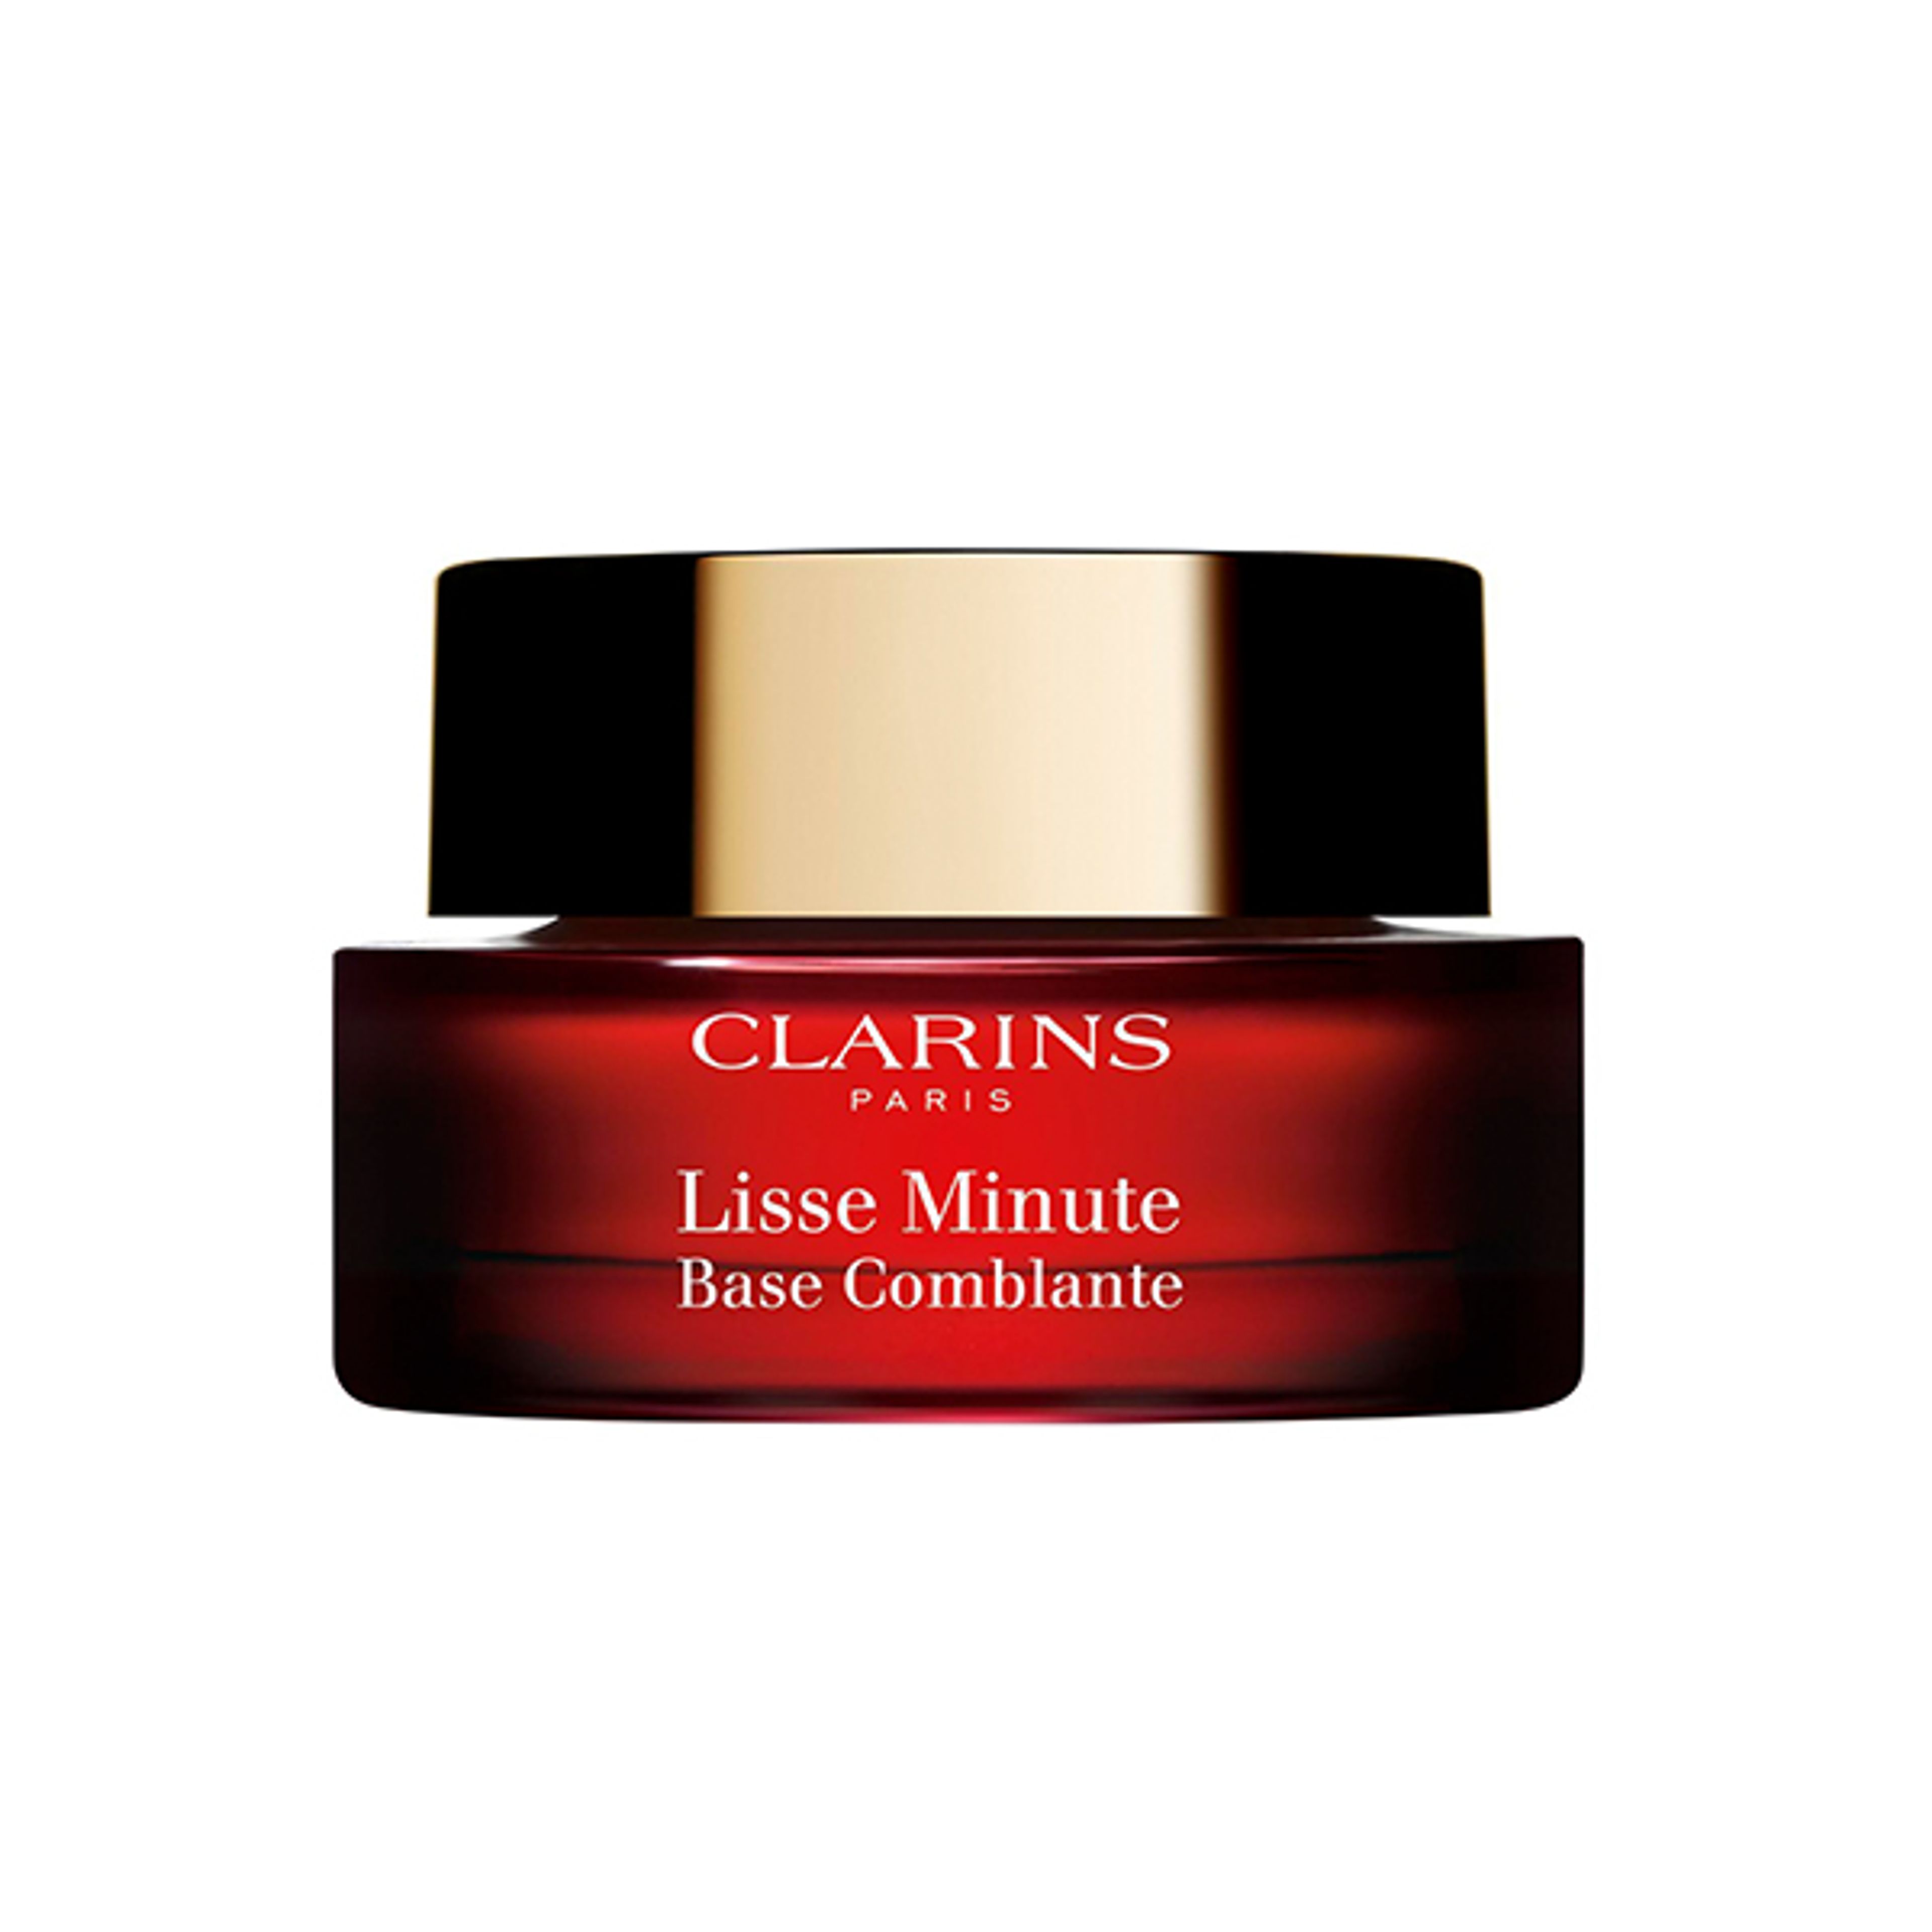 Clarins Lisse Minute 1